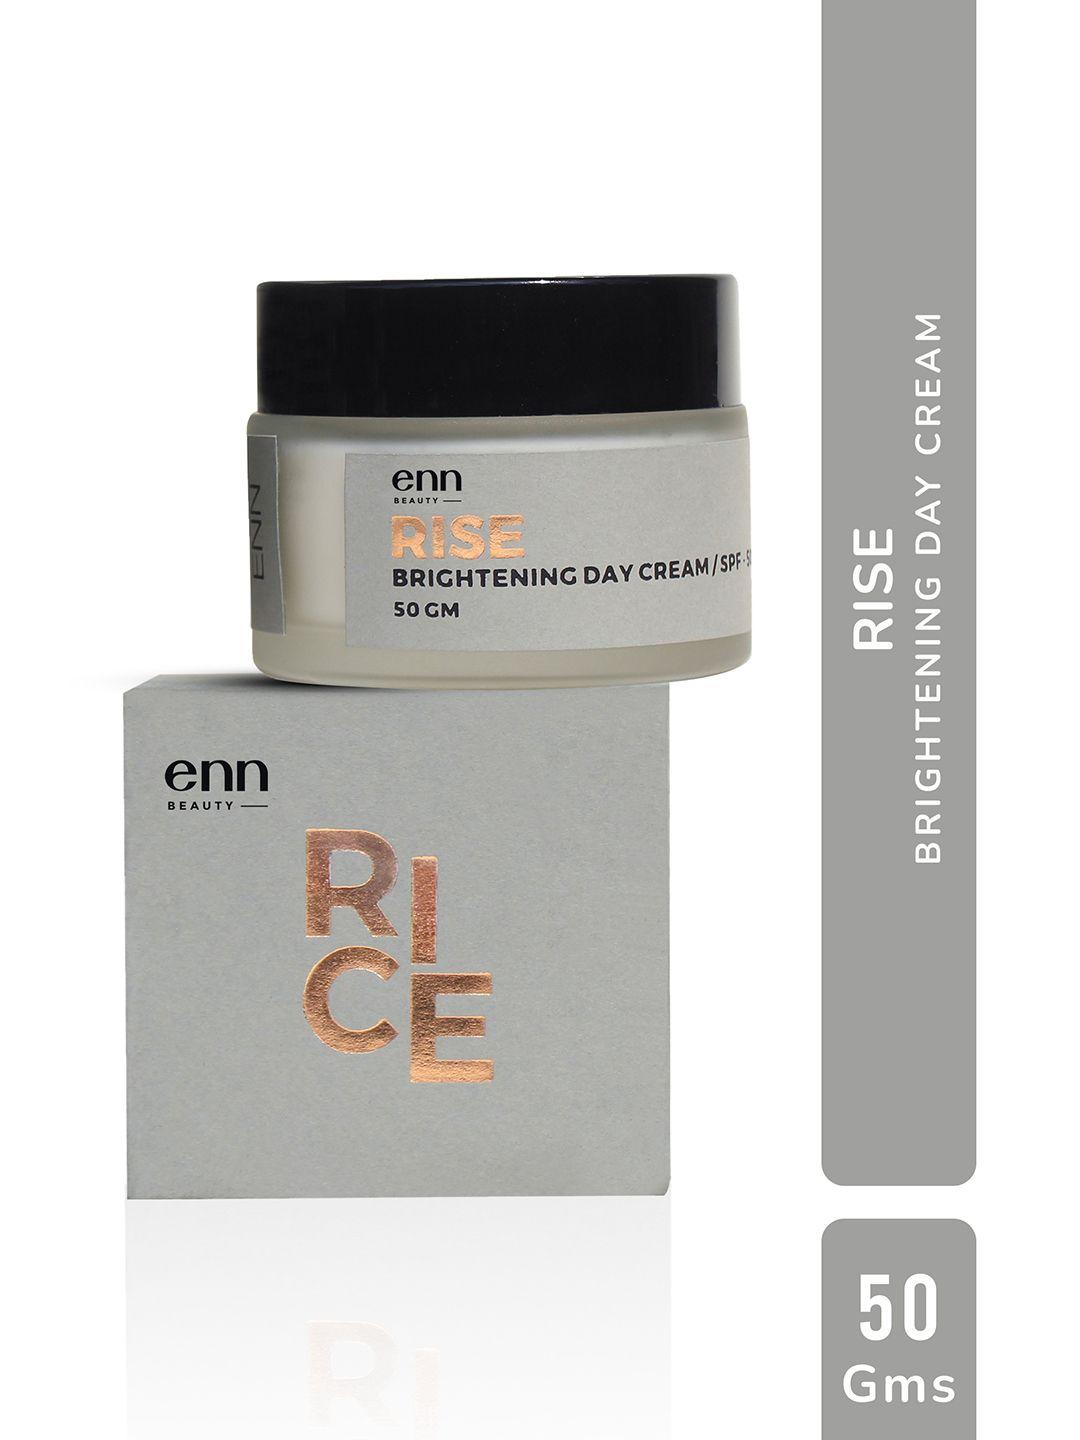 enn rise spf-50 skin brightening day cream with rice extract - 50 g